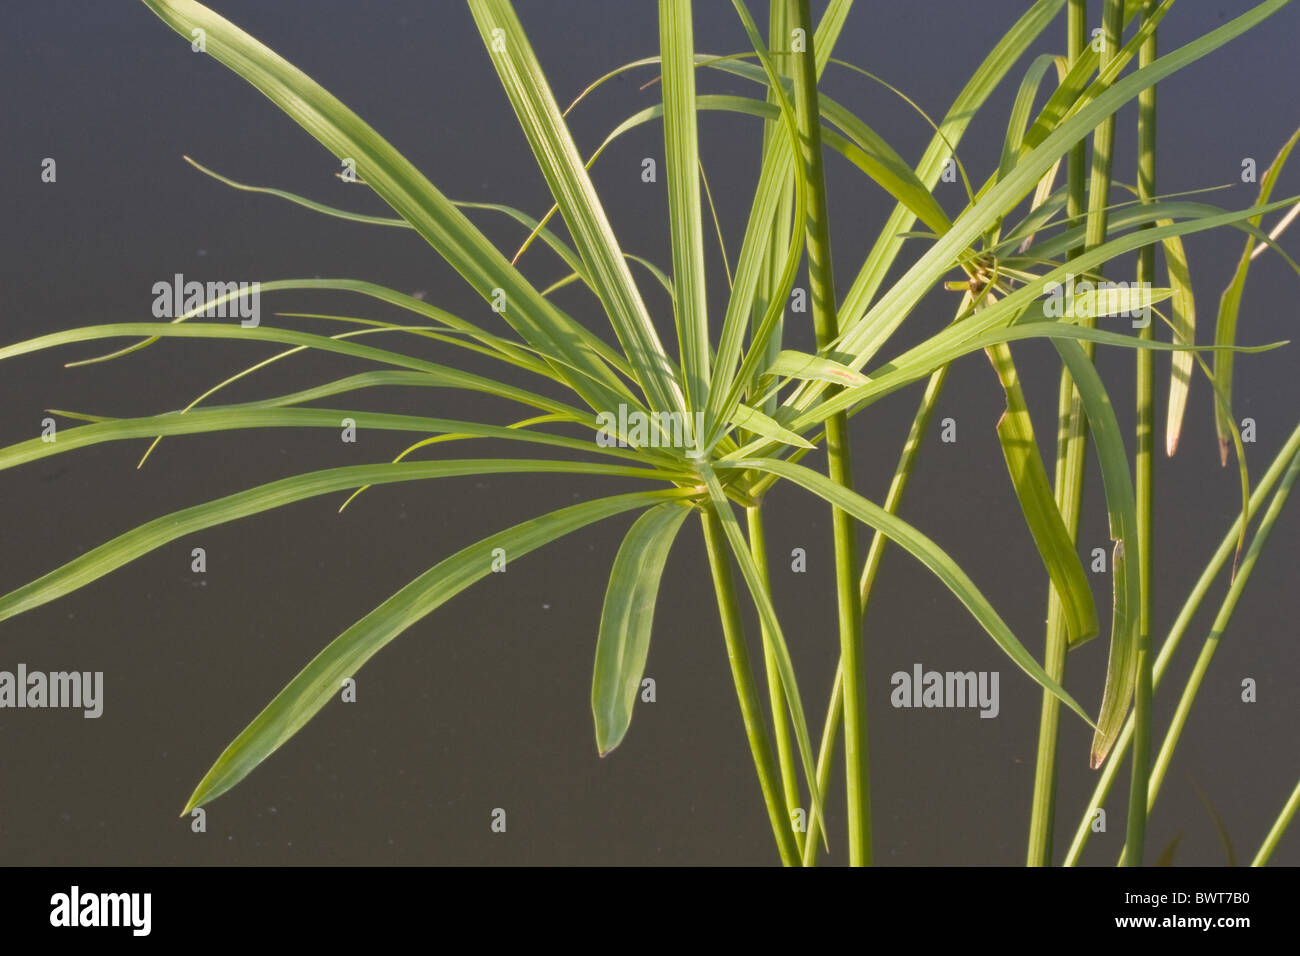 Aquatic Cultivated Cultivate Cultivation Cyperus Egyptian Garden Gardening Horticultural Horticulture Marginal Papyrus Plant Stock Photo